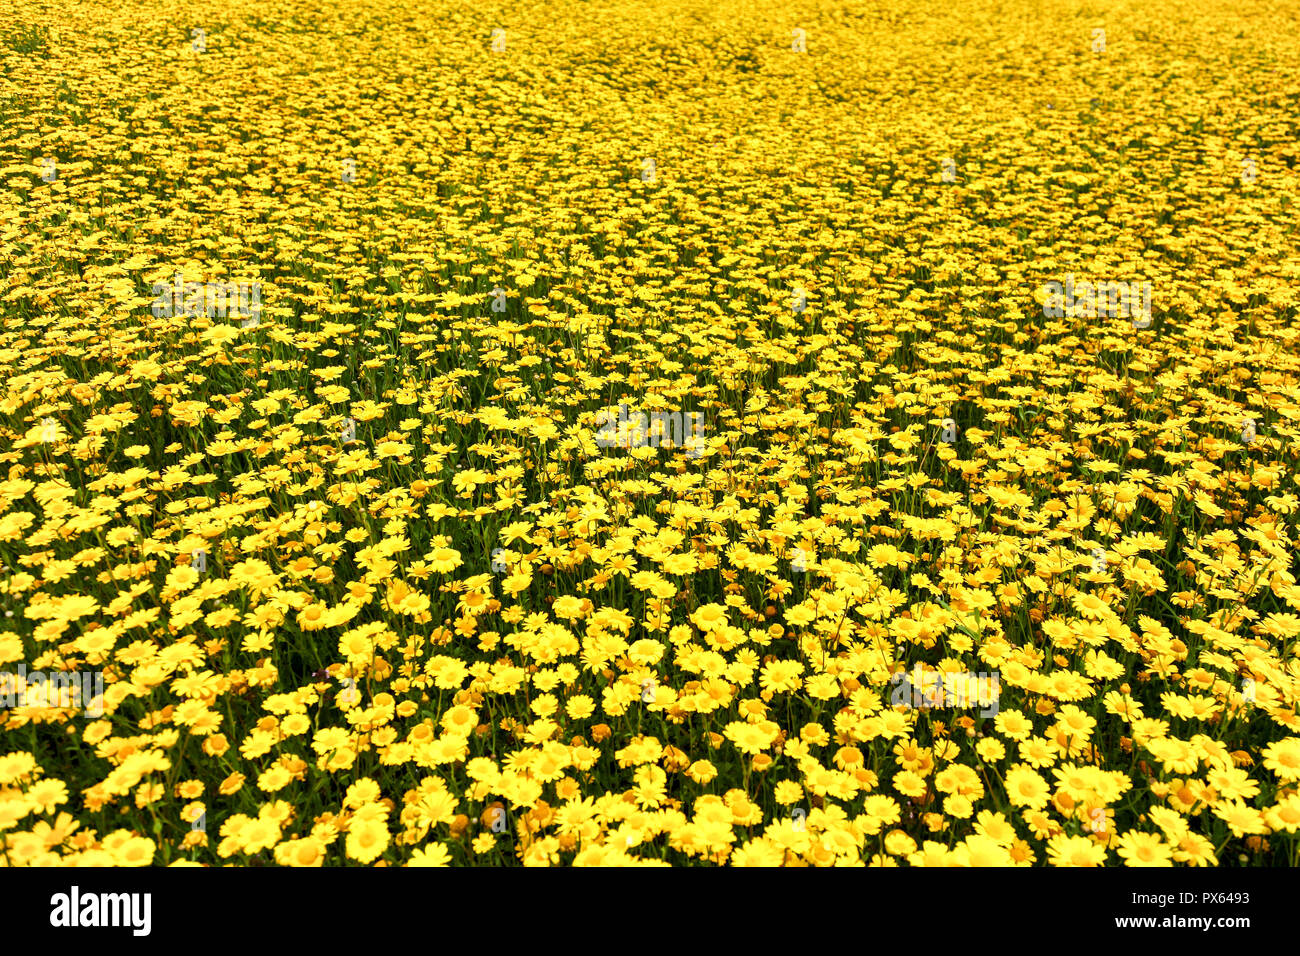 Yellow Corn Marigold (Glebionis segetum) flowers in a field at St. Just in Penwith, Cornwall, England, UK Stock Photo